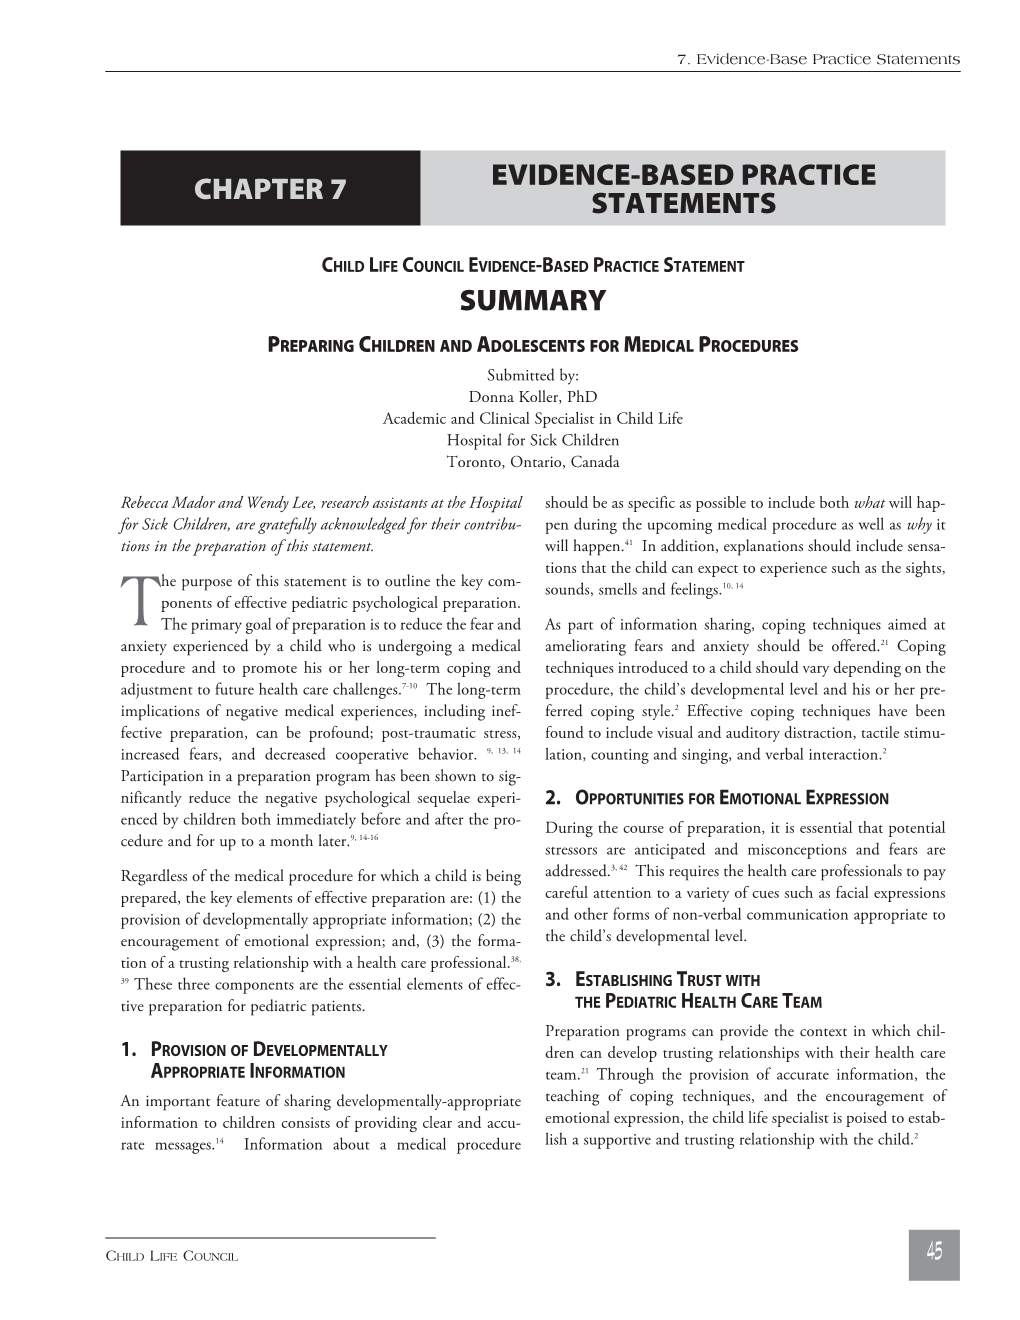 Evidence-Based Practice Statements Chapter 7 Summary